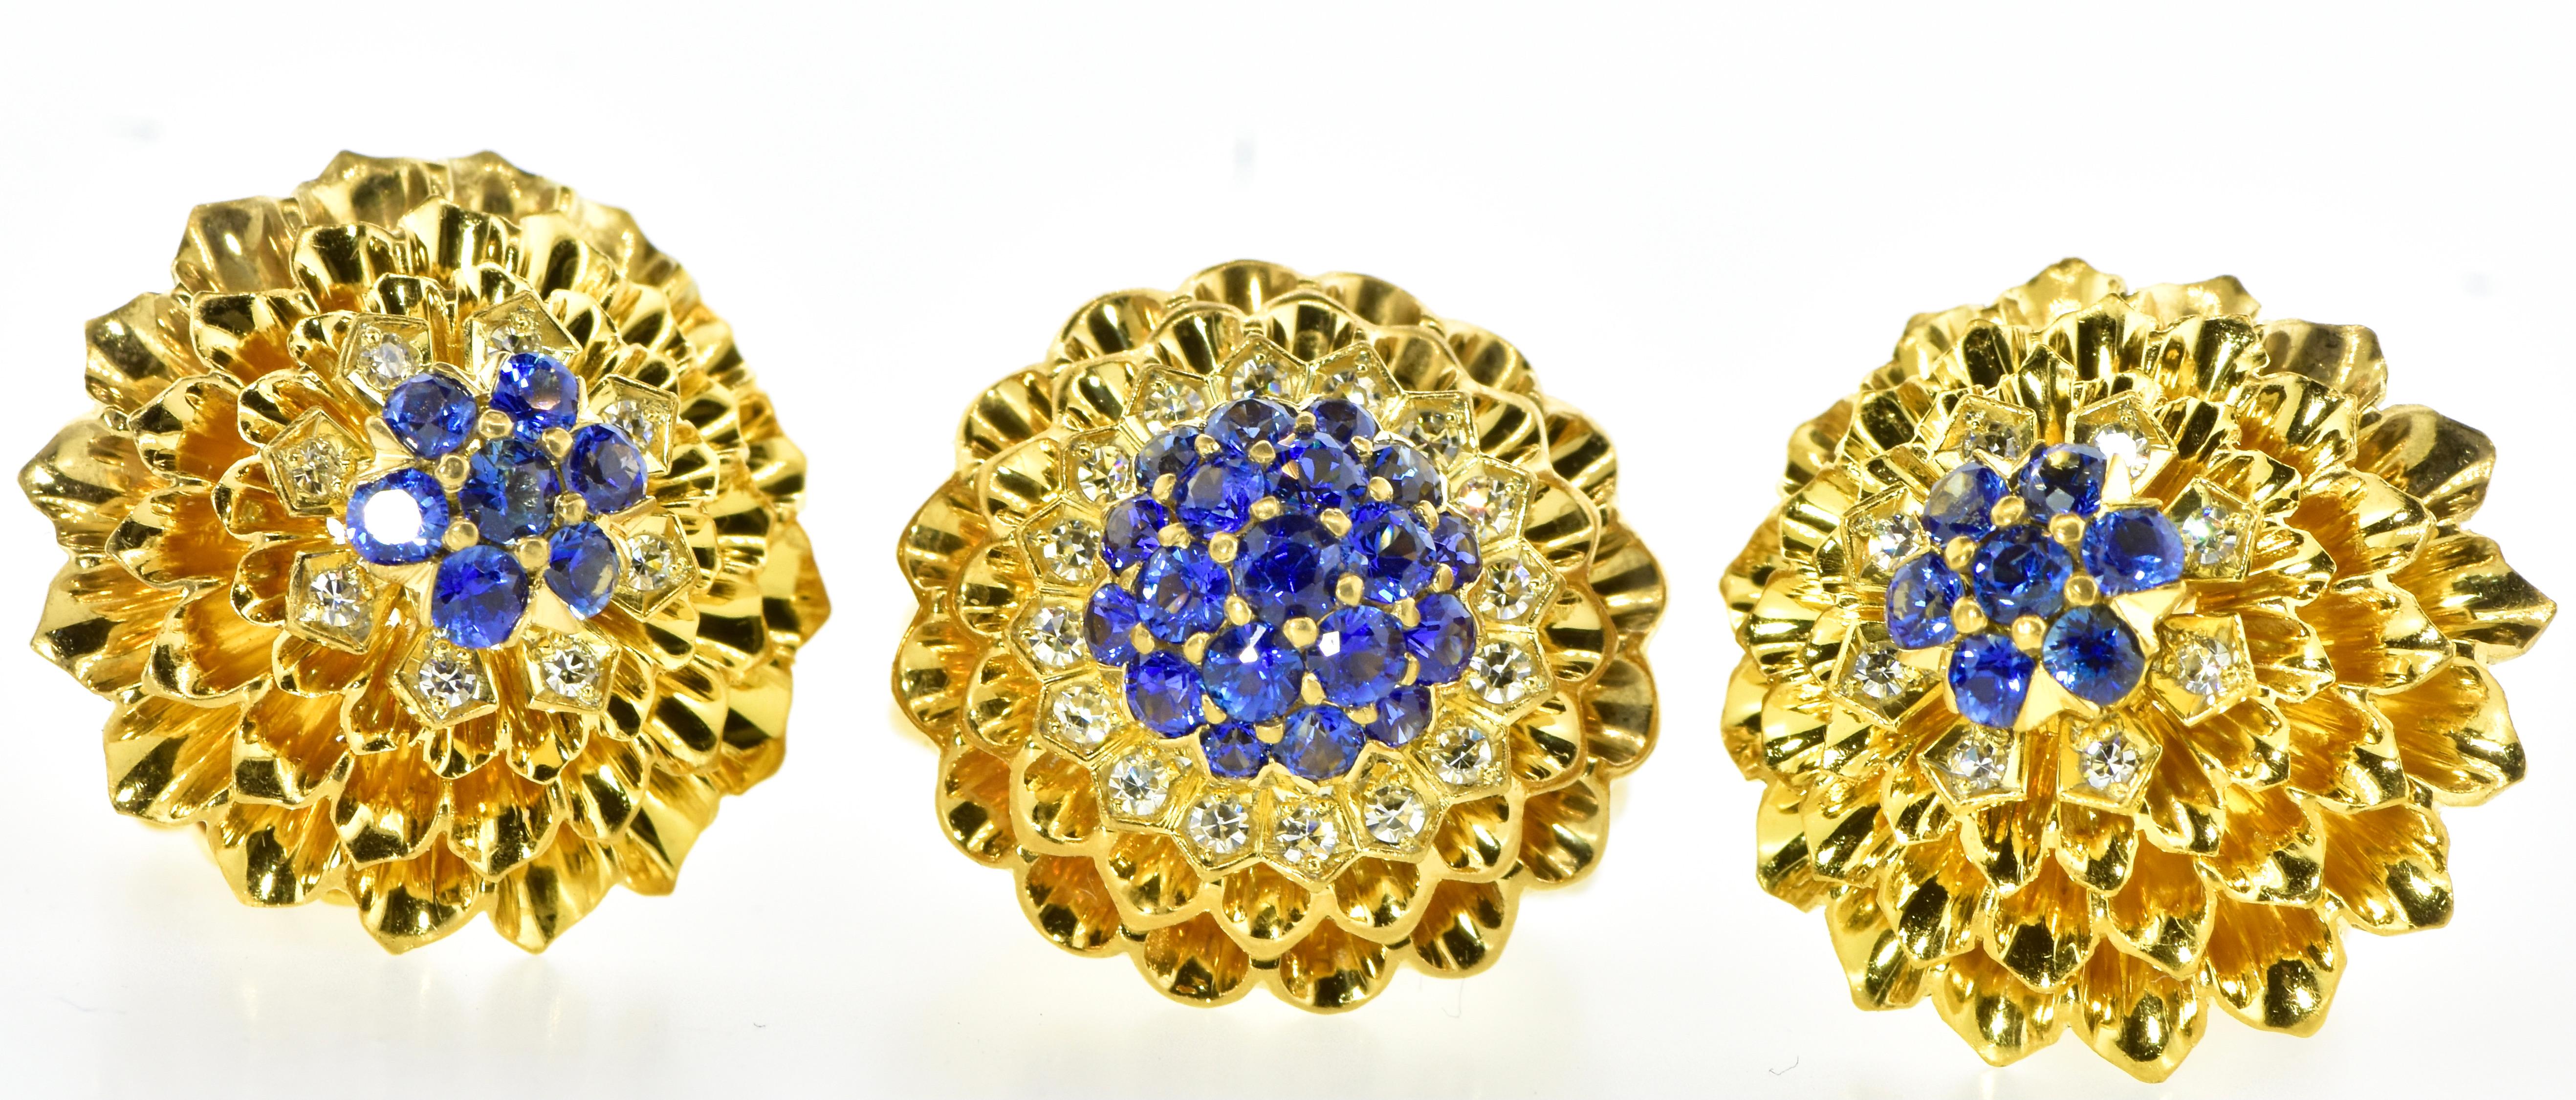 Tiffany Diamond and Sapphire ring and earring set made mid-20th century.  This matching suite of jewelry is in very fine condition.  The 33 bright blue sapphires weigh an estimated 1.90 cts.   Surrounding these round brilliant cut stones are 33